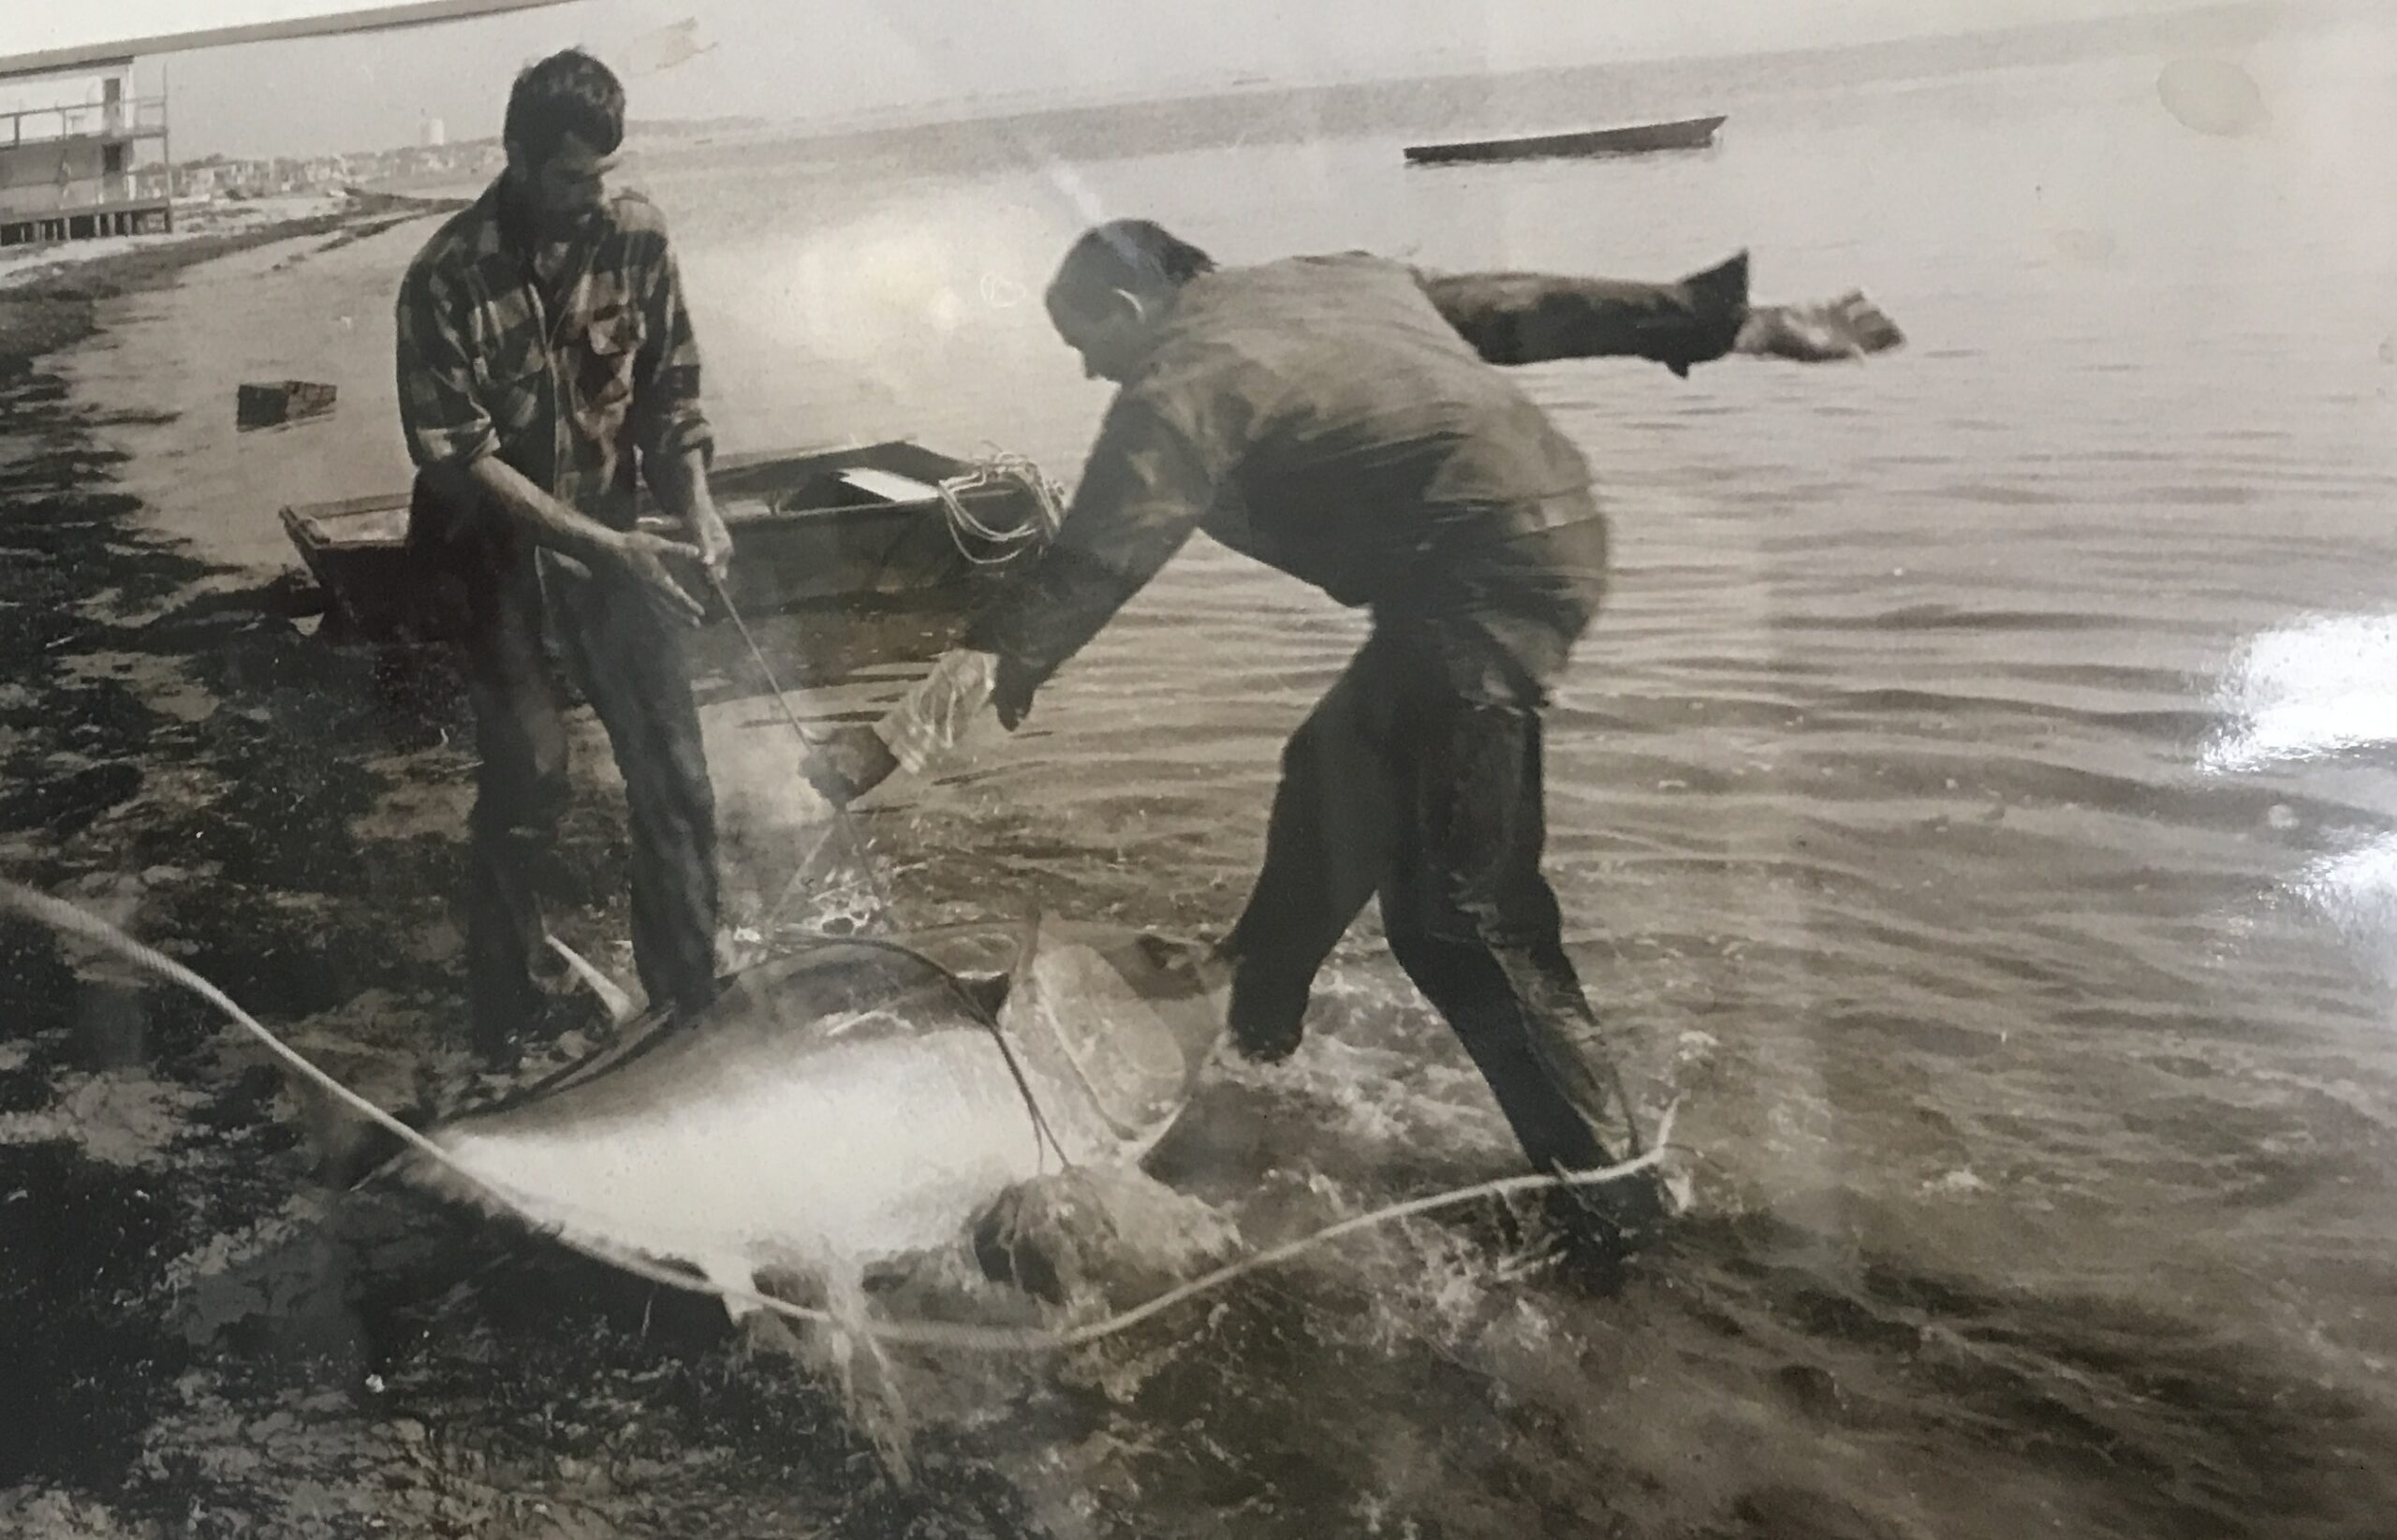 An ecosystem investigator remembers a tuna sleighride in Provincetown harbor